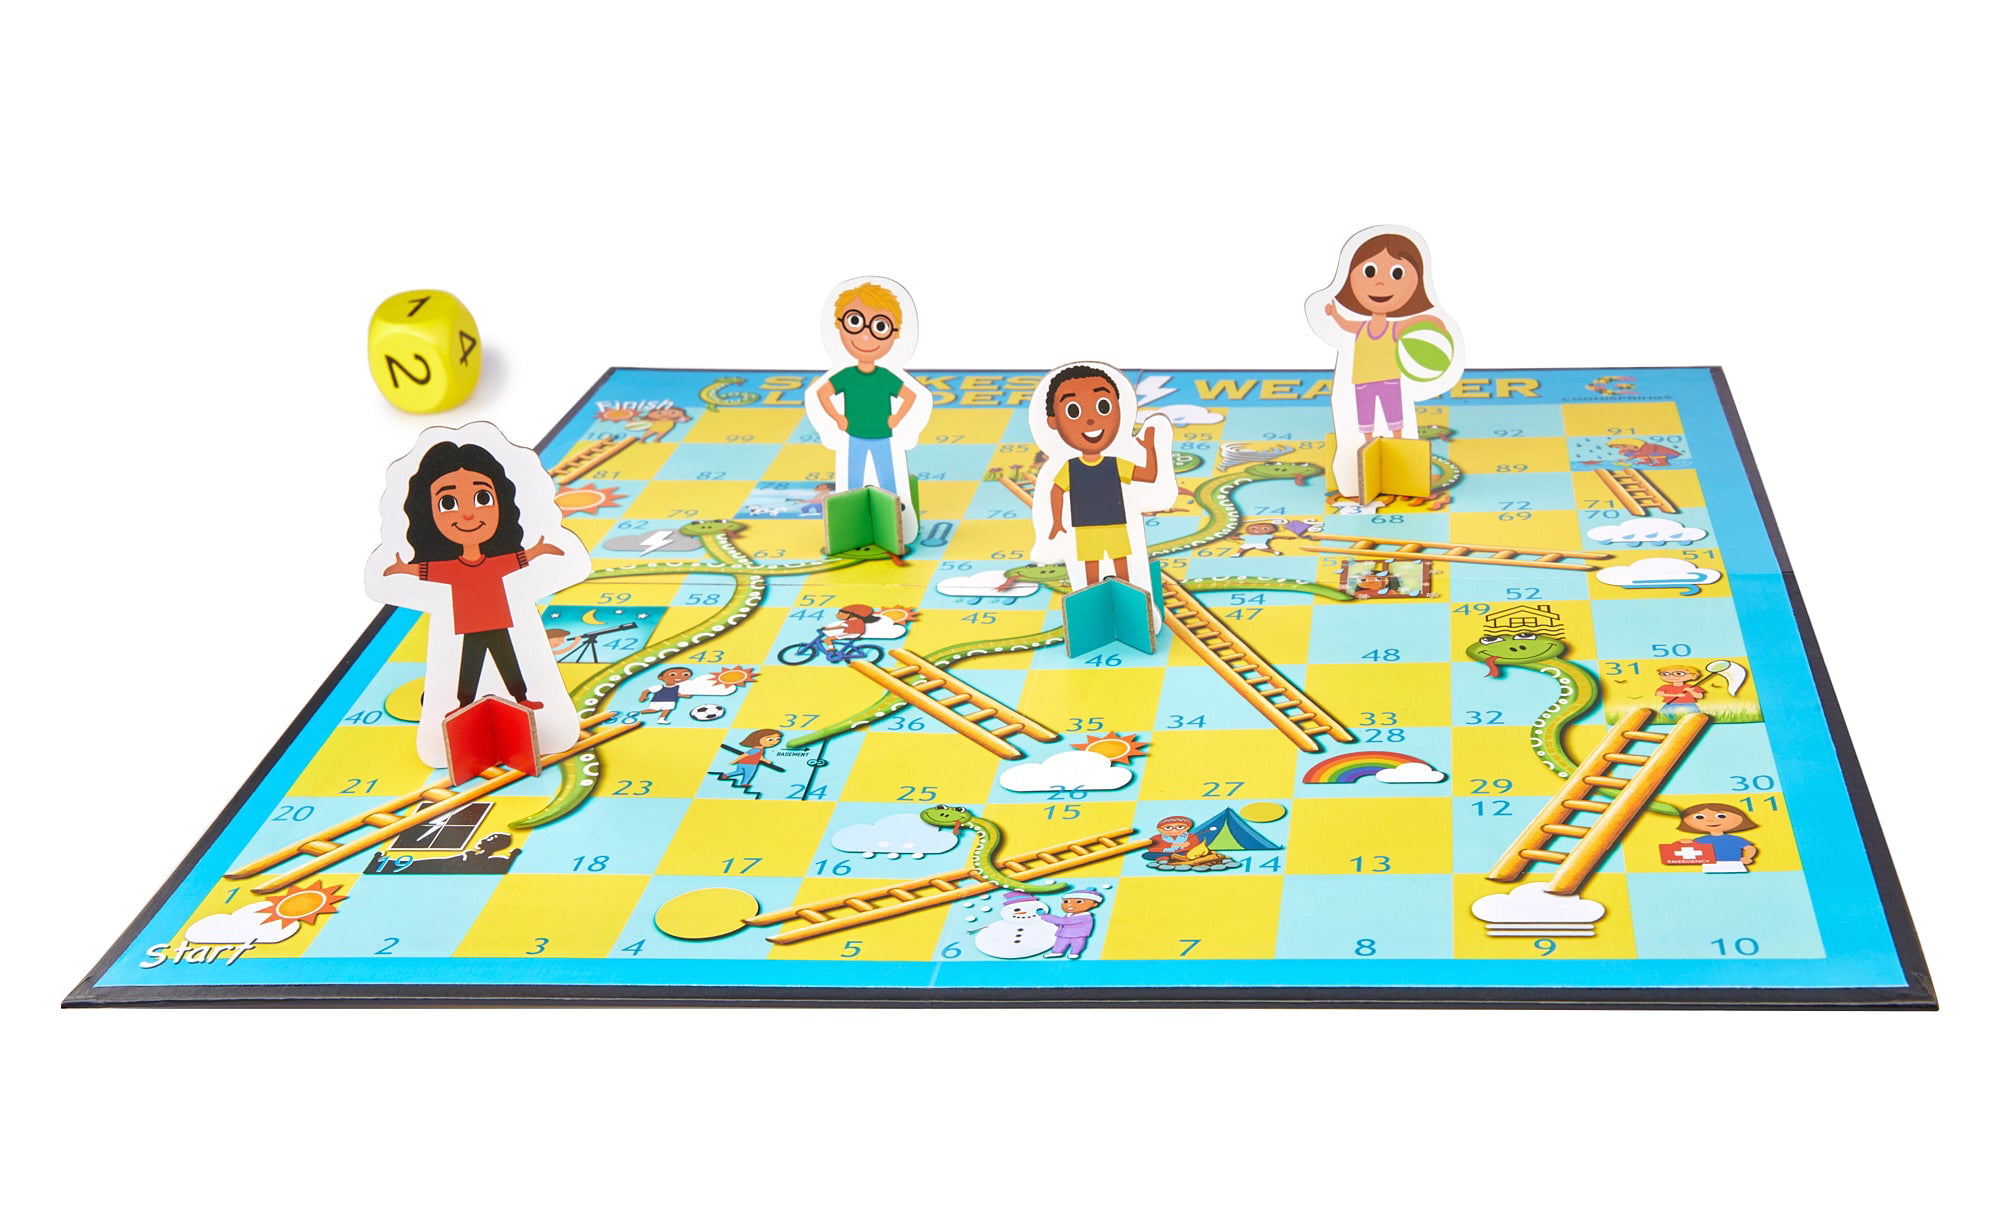 Cognisprings Snakes and Ladders Educational Board Game for Kids & Family,  2-4 Players, Learn About Weather While Playing